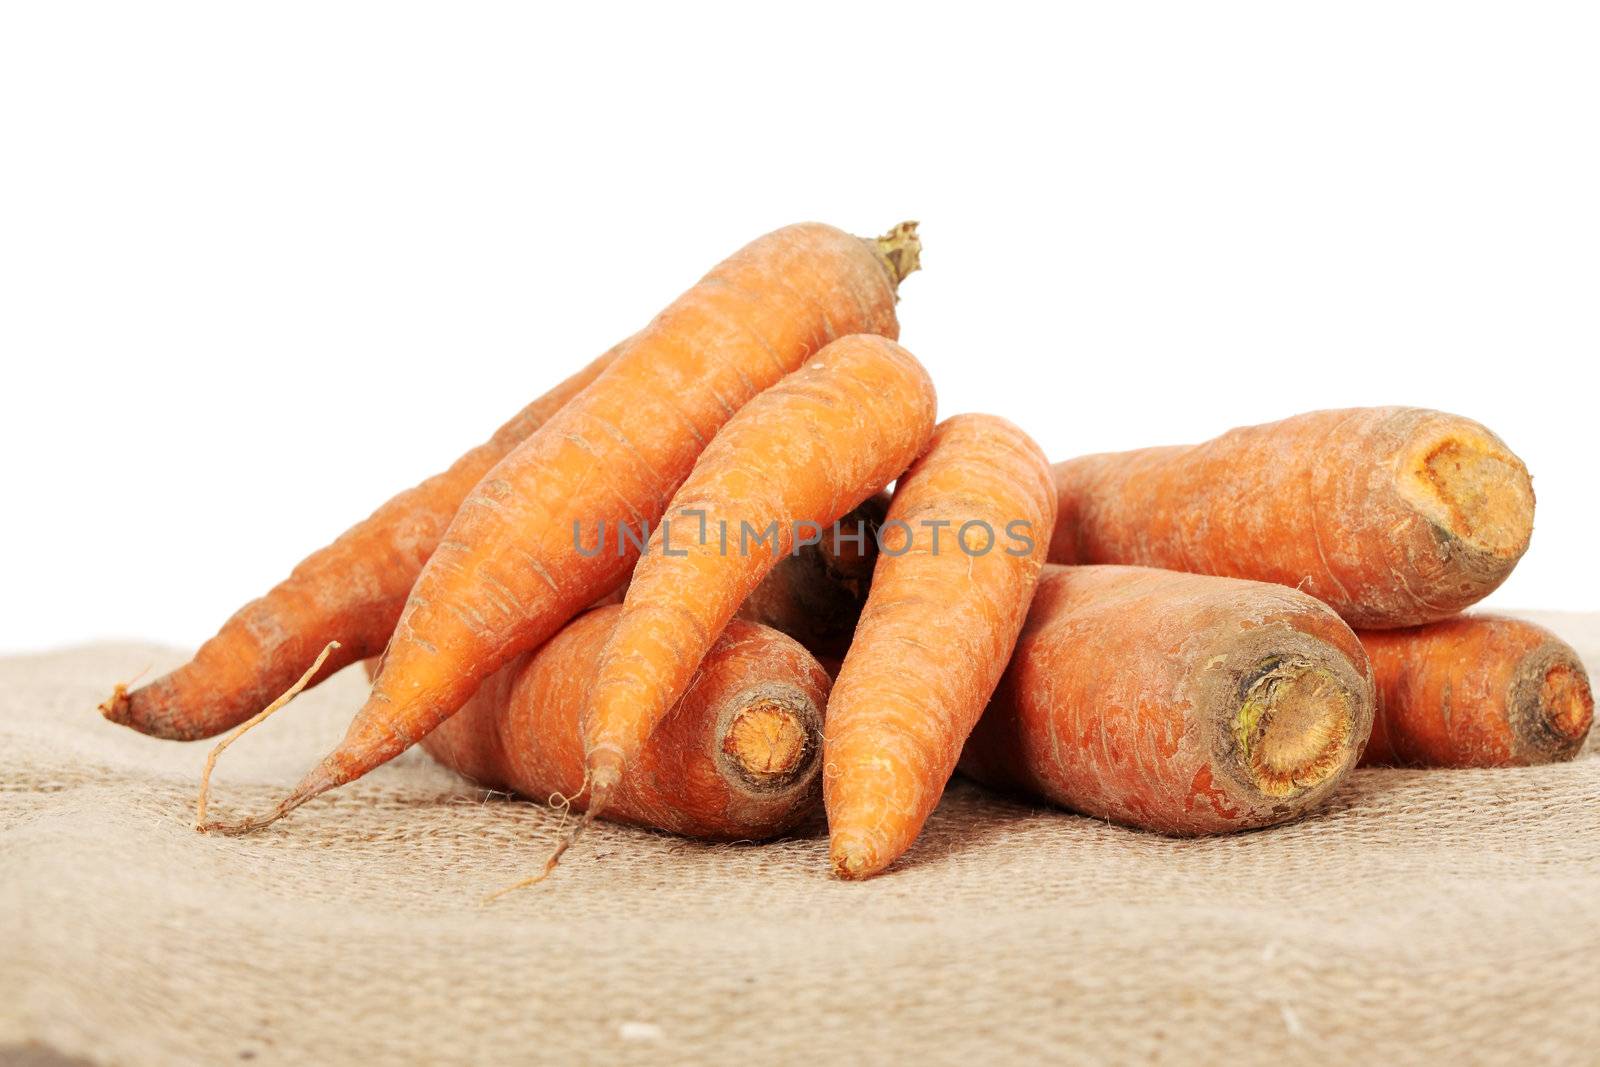 Fresh ecologycal carrots (eco food concept)